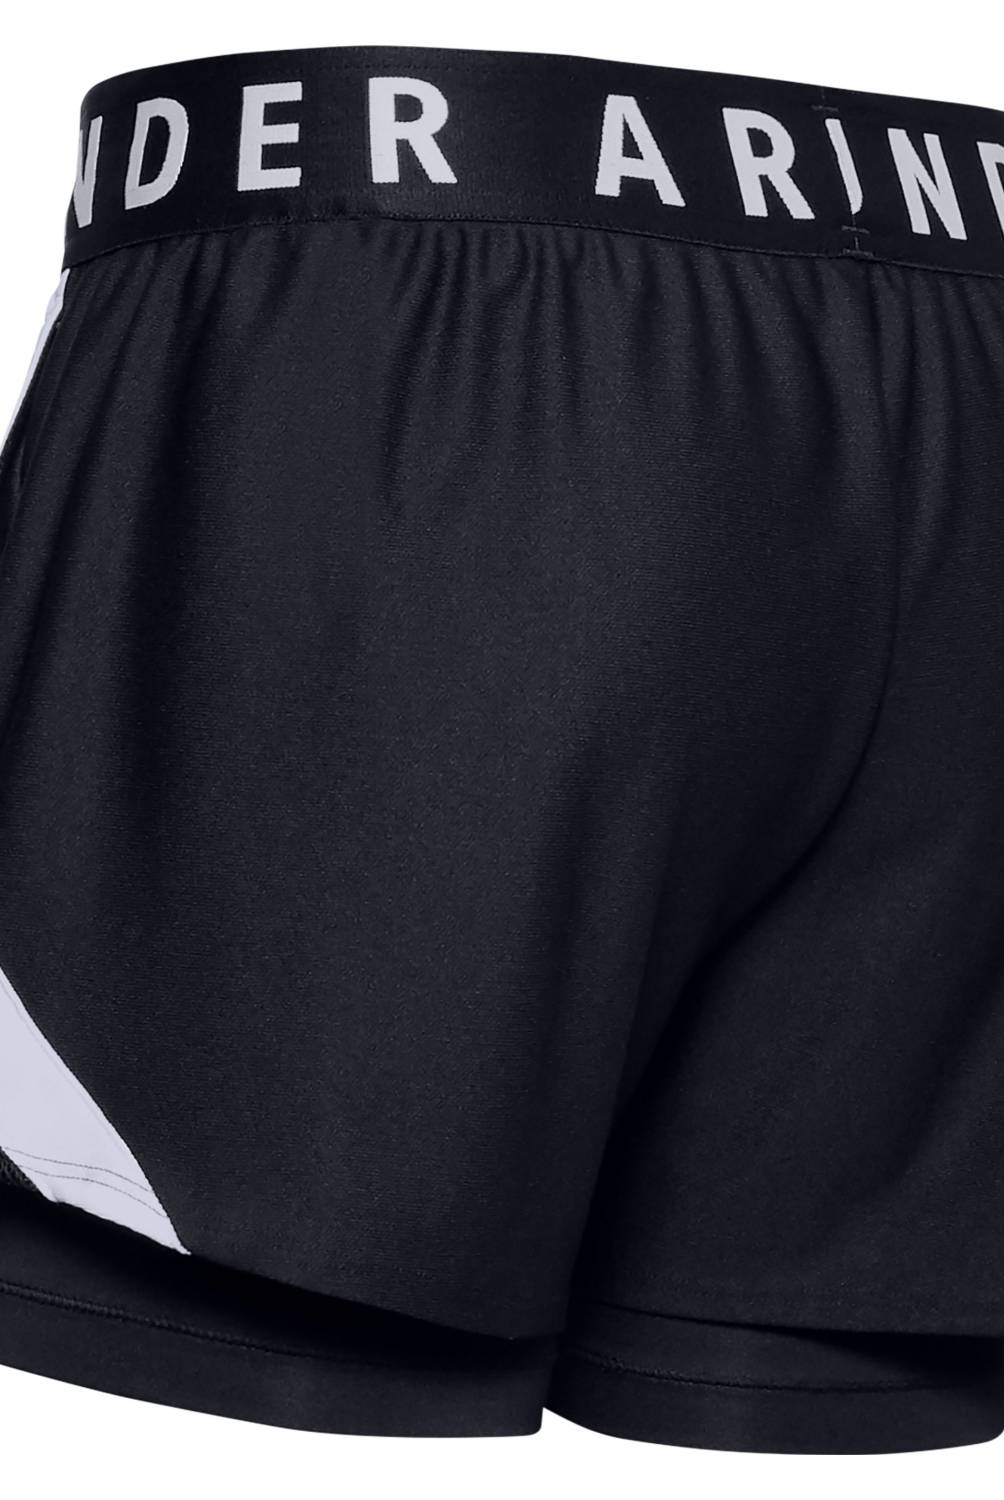 UNDER ARMOUR - Under Armour Shorts Deportivo Mujer